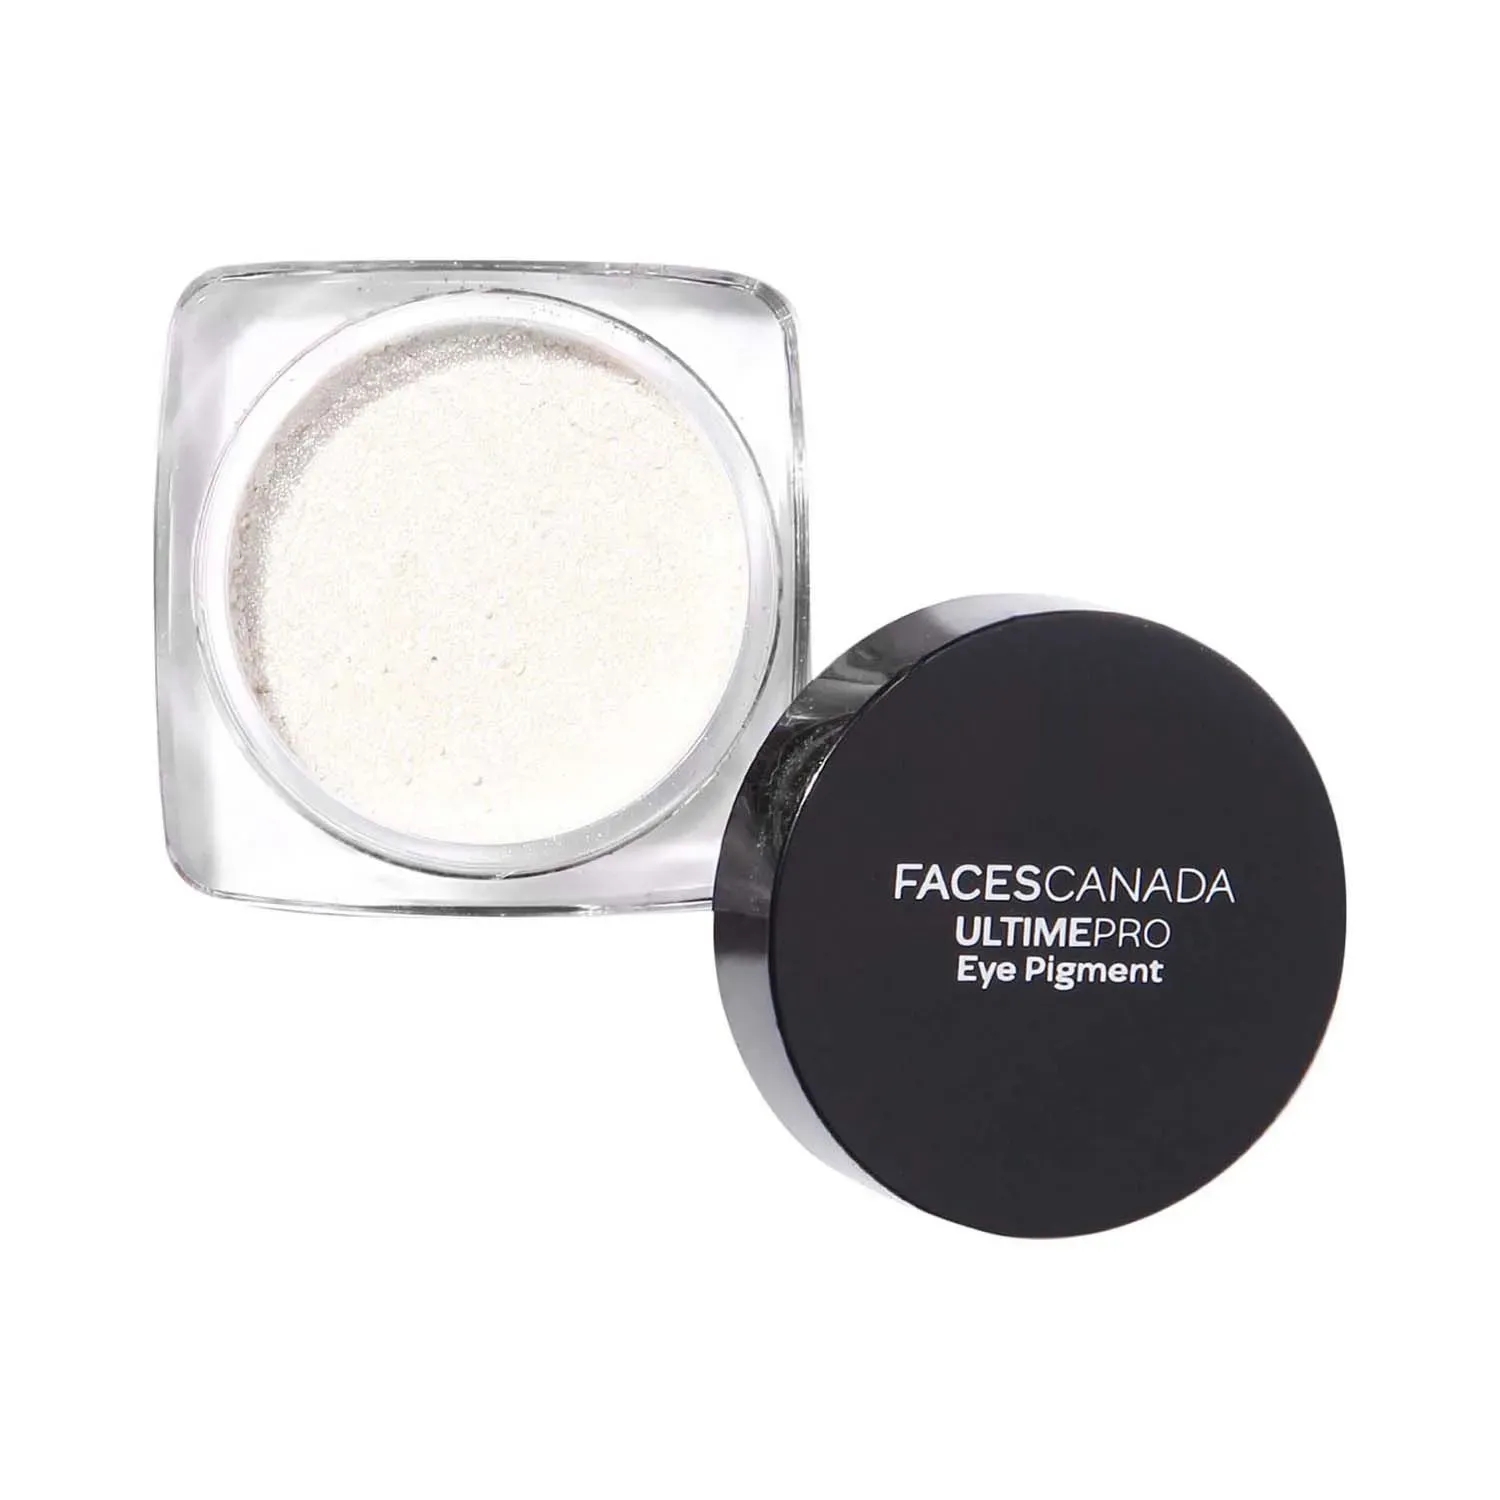 Faces Canada | Faces Canada Eye Pigment - 04 Holographic (1.8g)